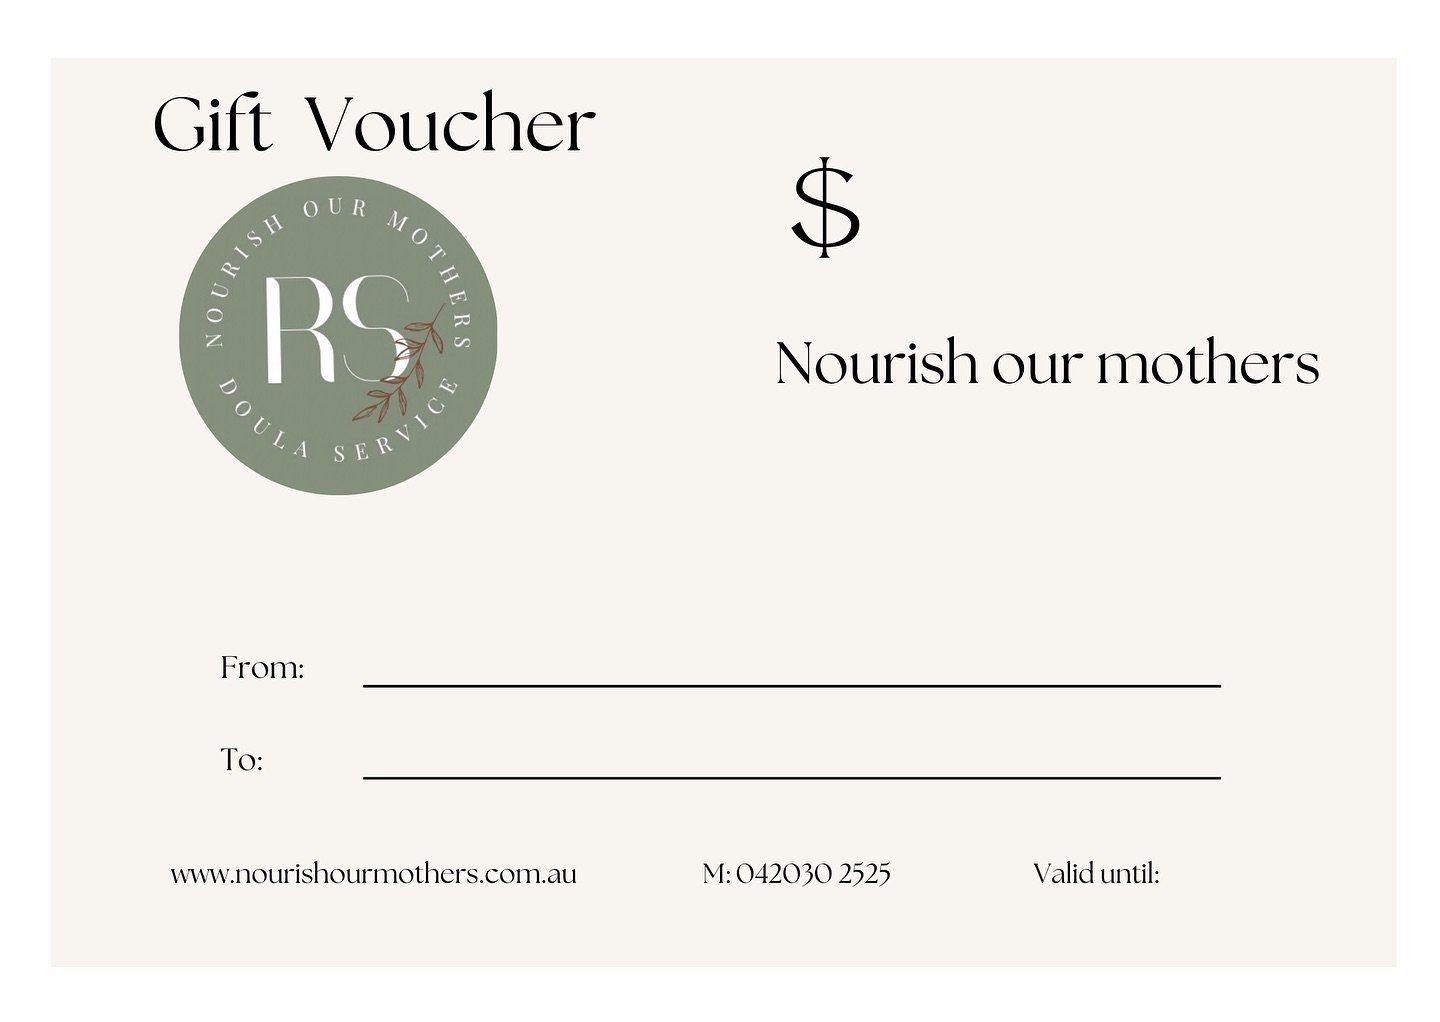 ✨VOUCHERS NOW AVAILABLE✨

Treat the special moms in your life to the gift of relaxation and nourishment this Mother&rsquo;s Day! Give the gift of postpartum support with a voucher for postpartum doula care or my fourth trimester meal services. Becaus